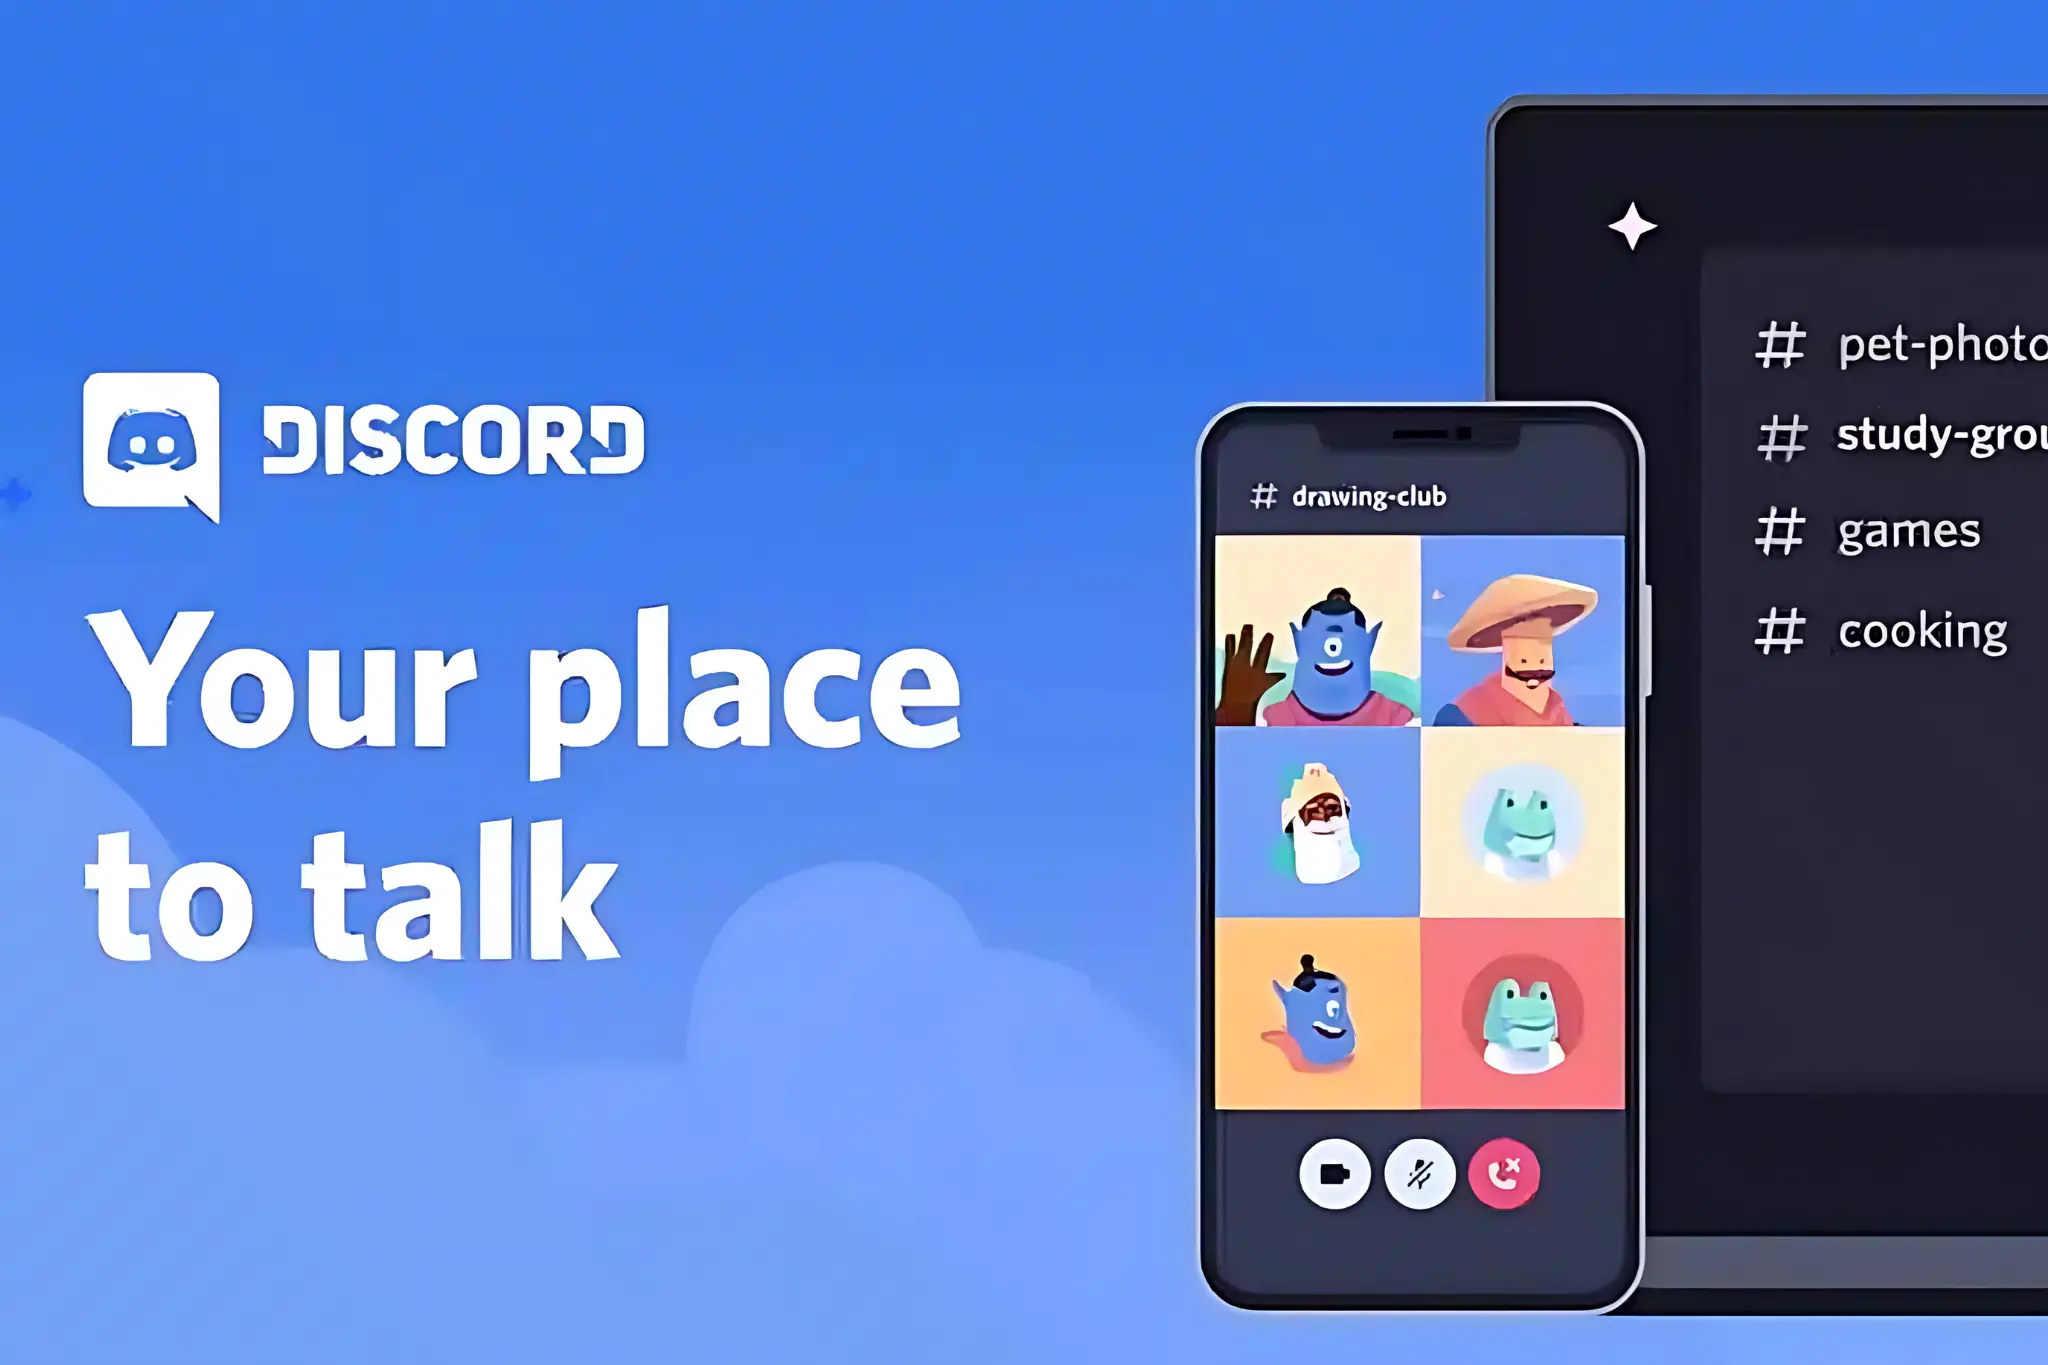 Discord mobile and laptop mockup along with logo